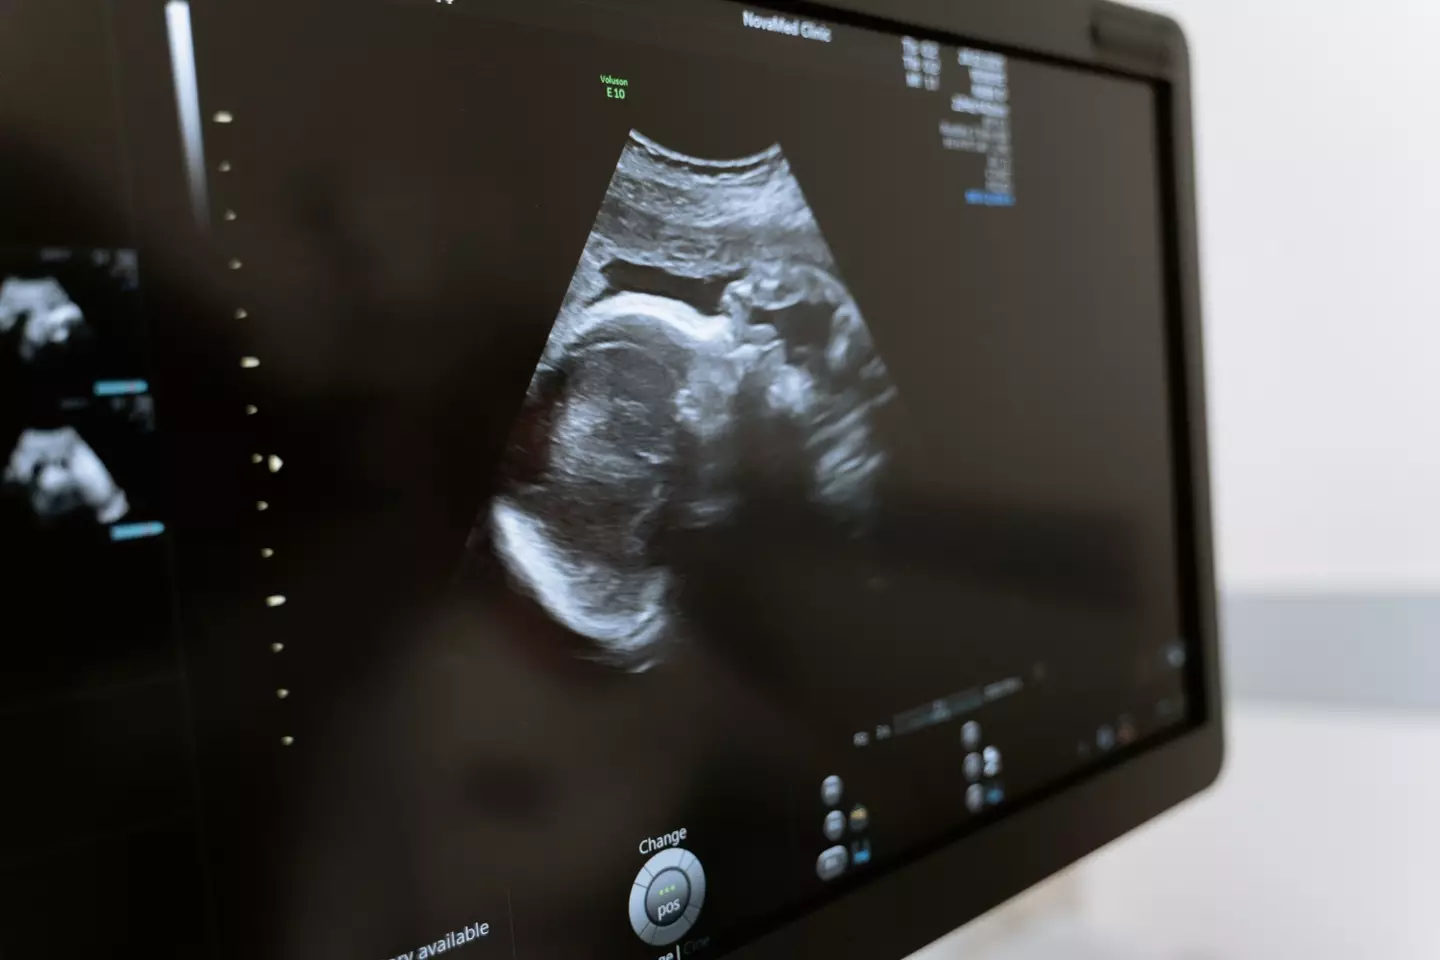 Medics used an ultrasound to guide them during the procedure.